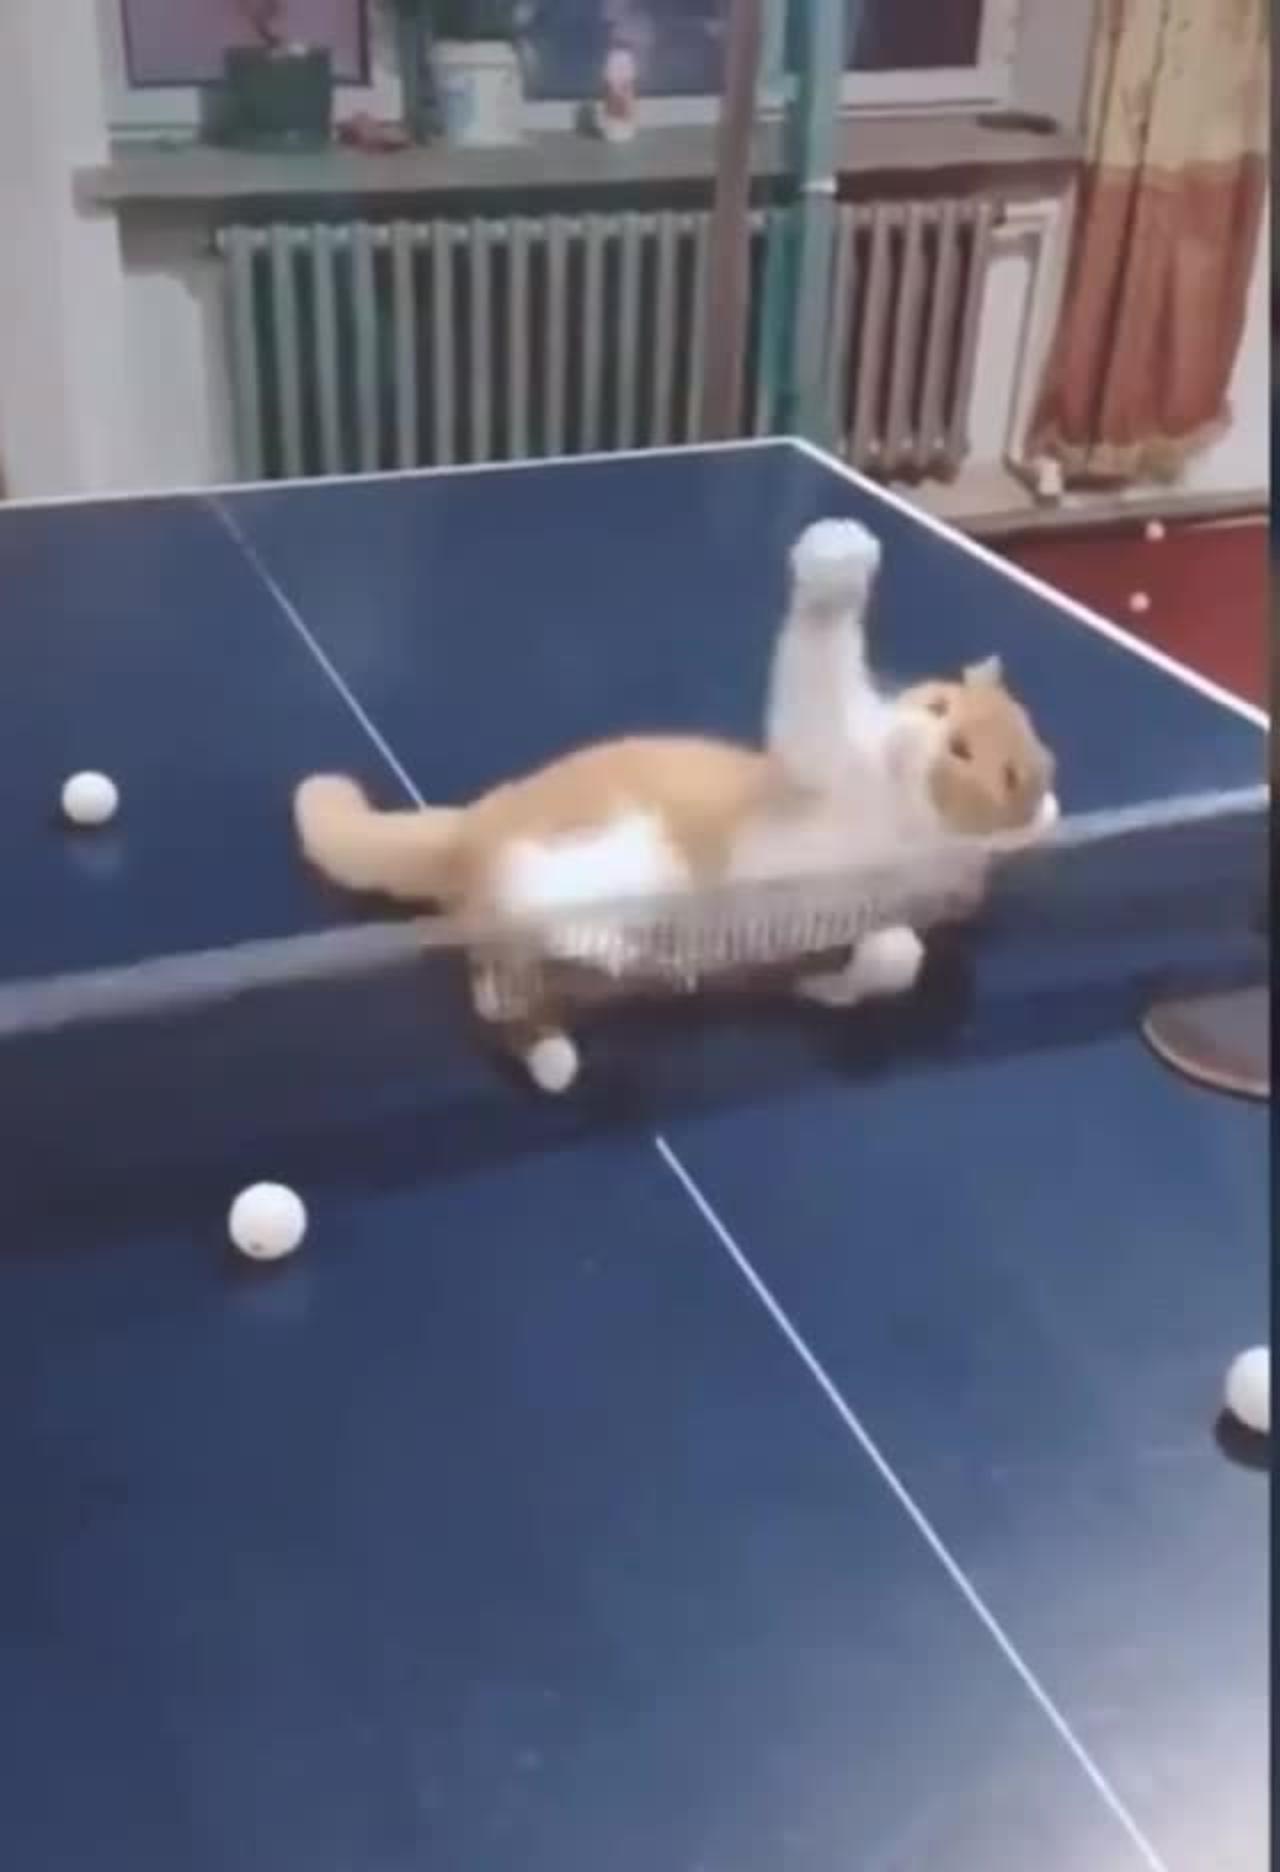 Champion of table tennis funny cat